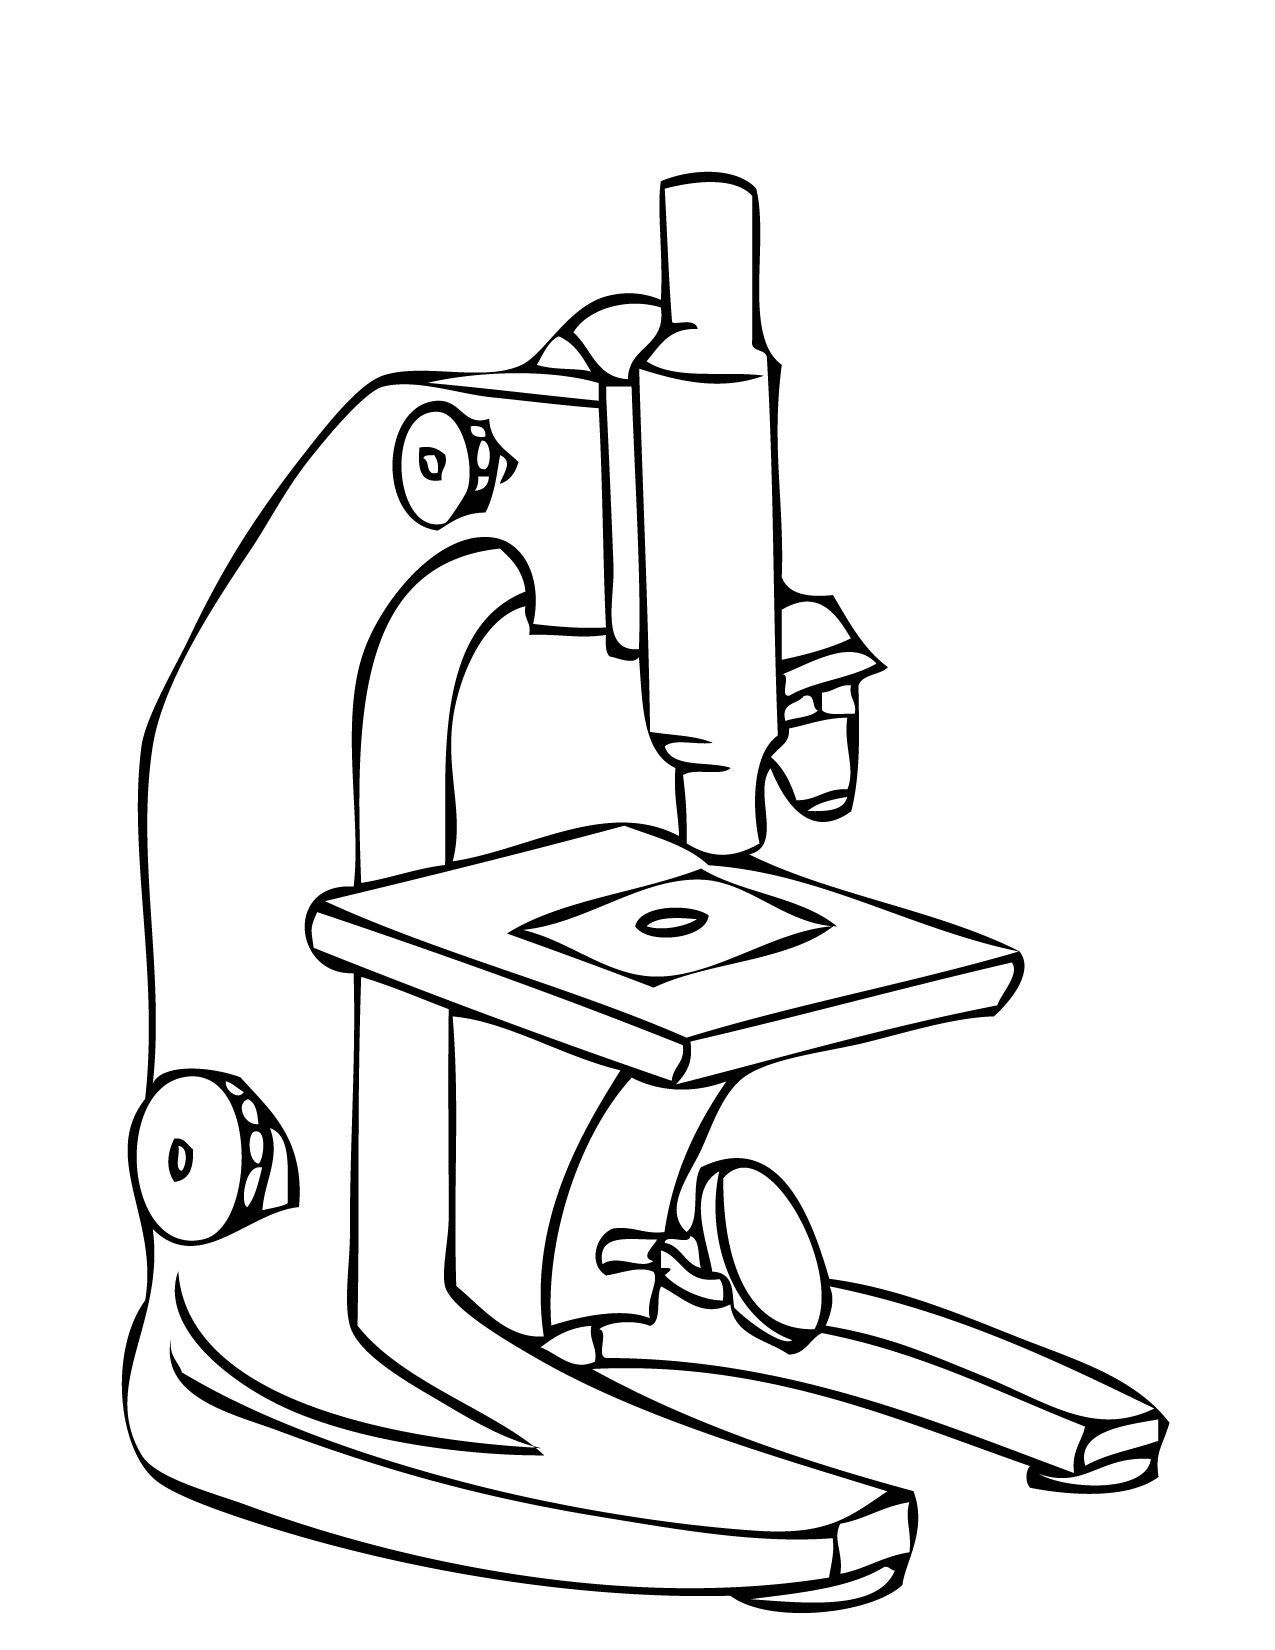 Microscope Pictures - Cliparts.co